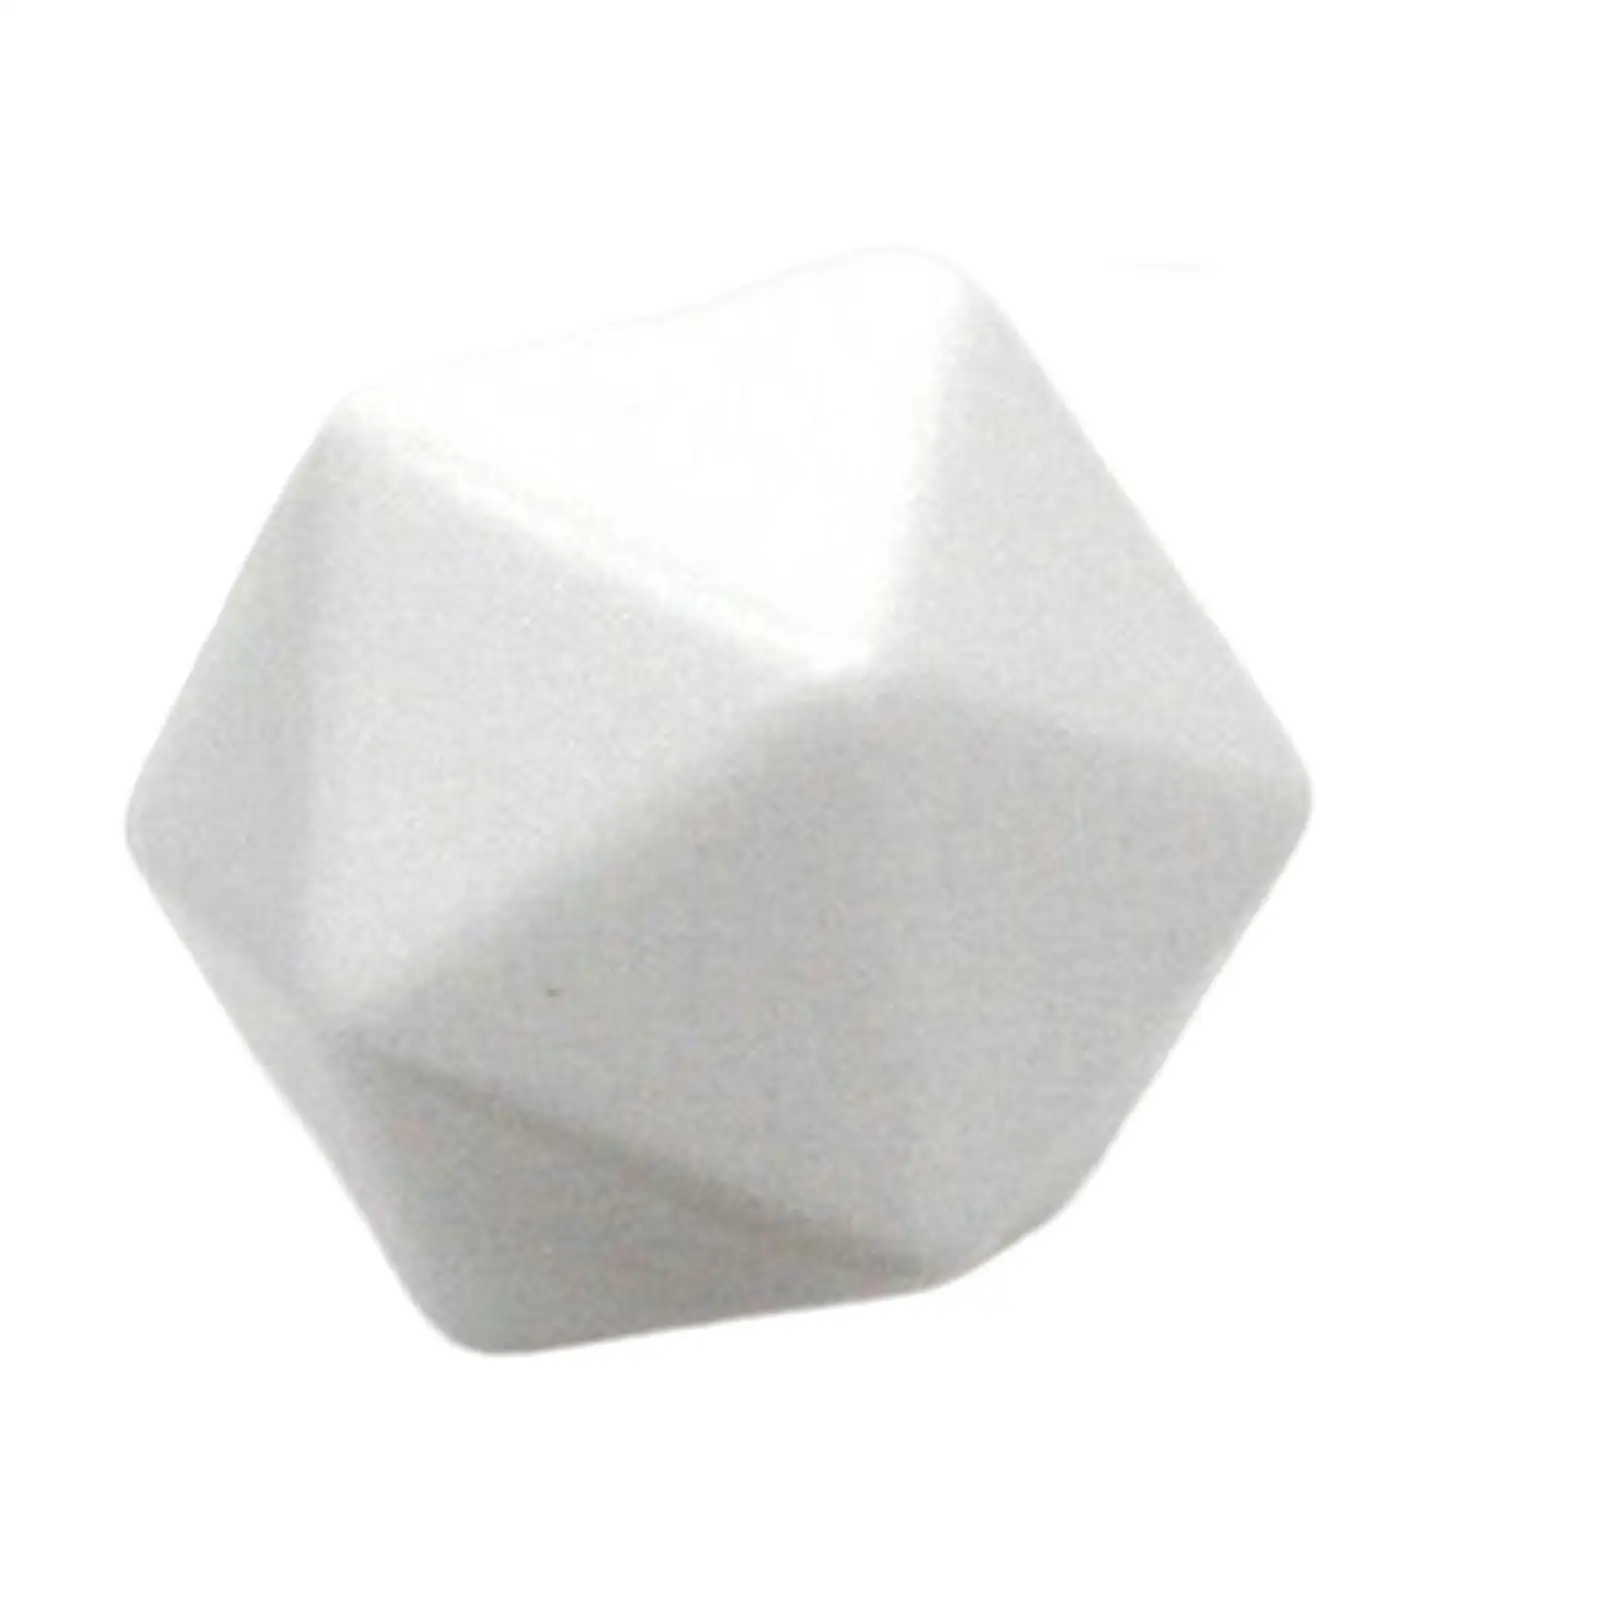 Acrylic Blank White Dices Game Dices for Math Counting Teaching, Role Playing